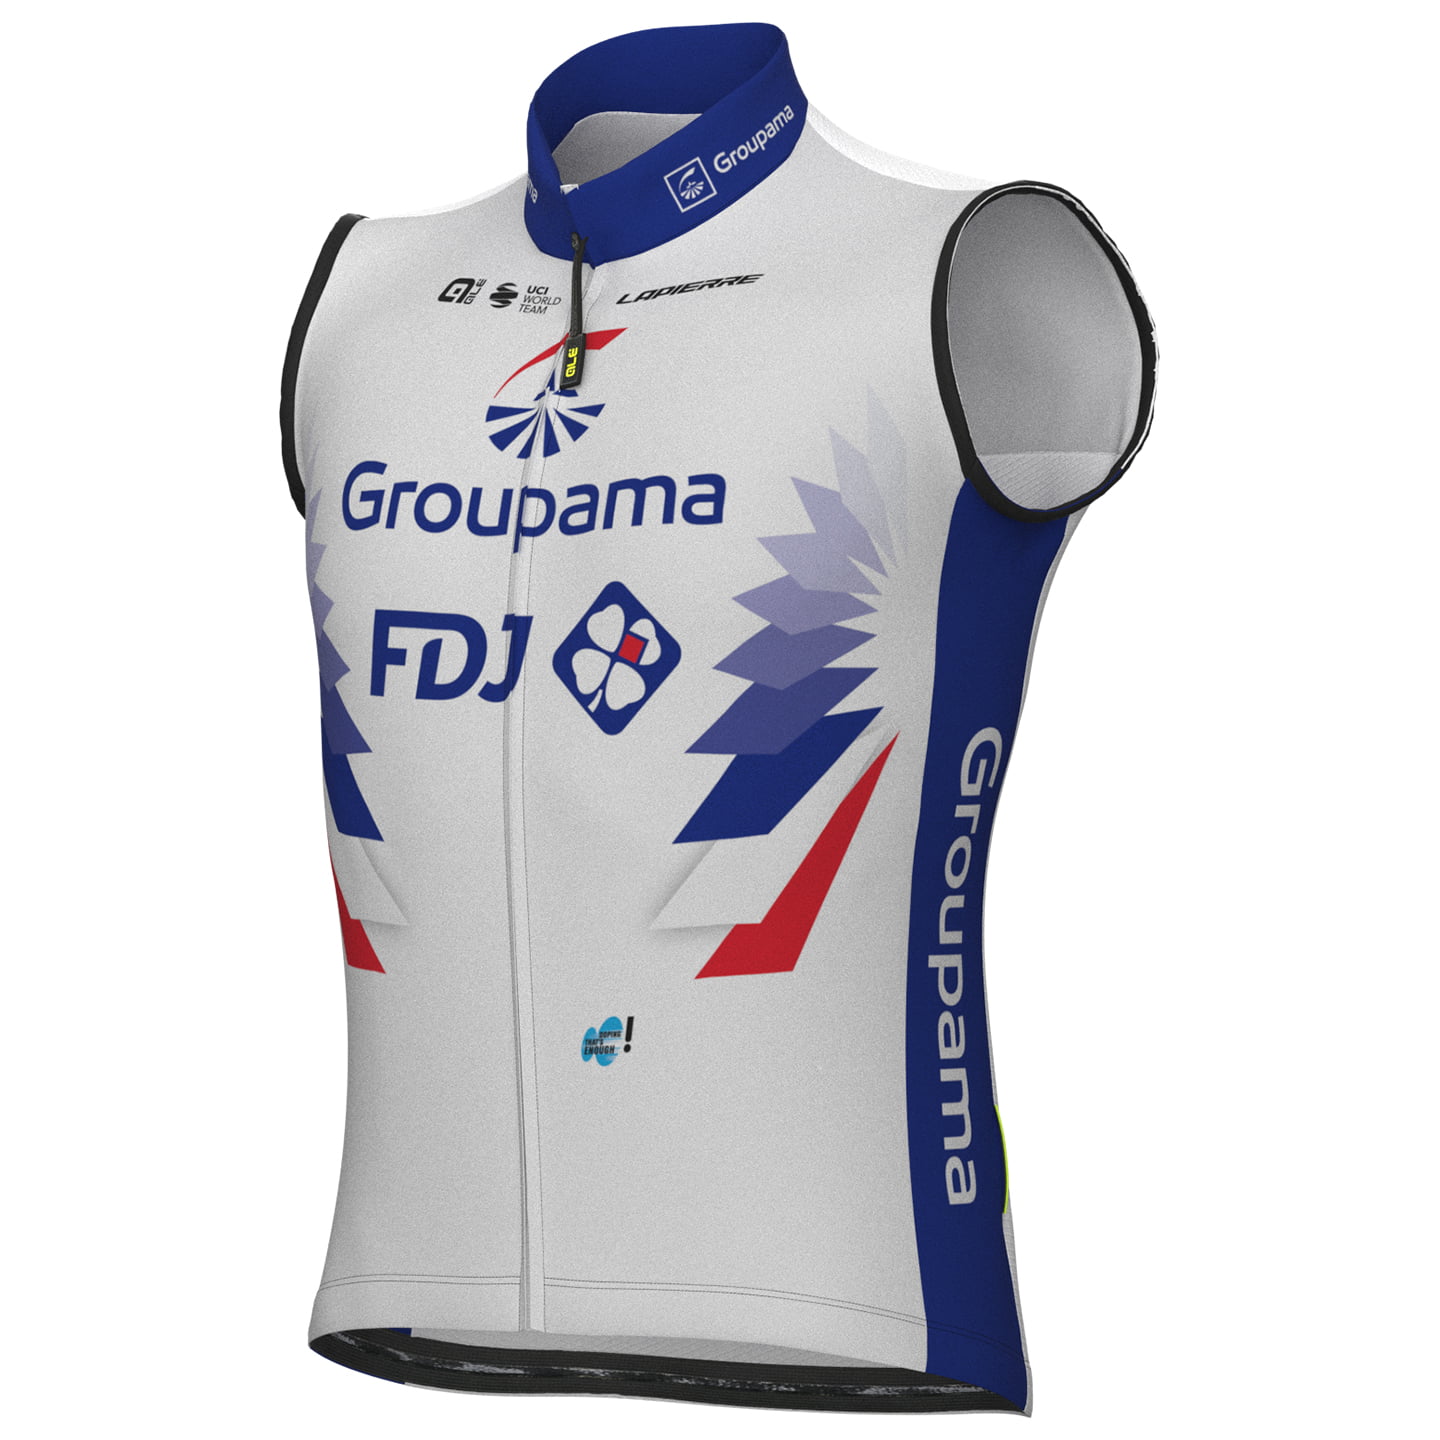 GROUPAMA - FDJ 2022 Wind Vest, for men, size S, Cycling vest, Cycling clothing